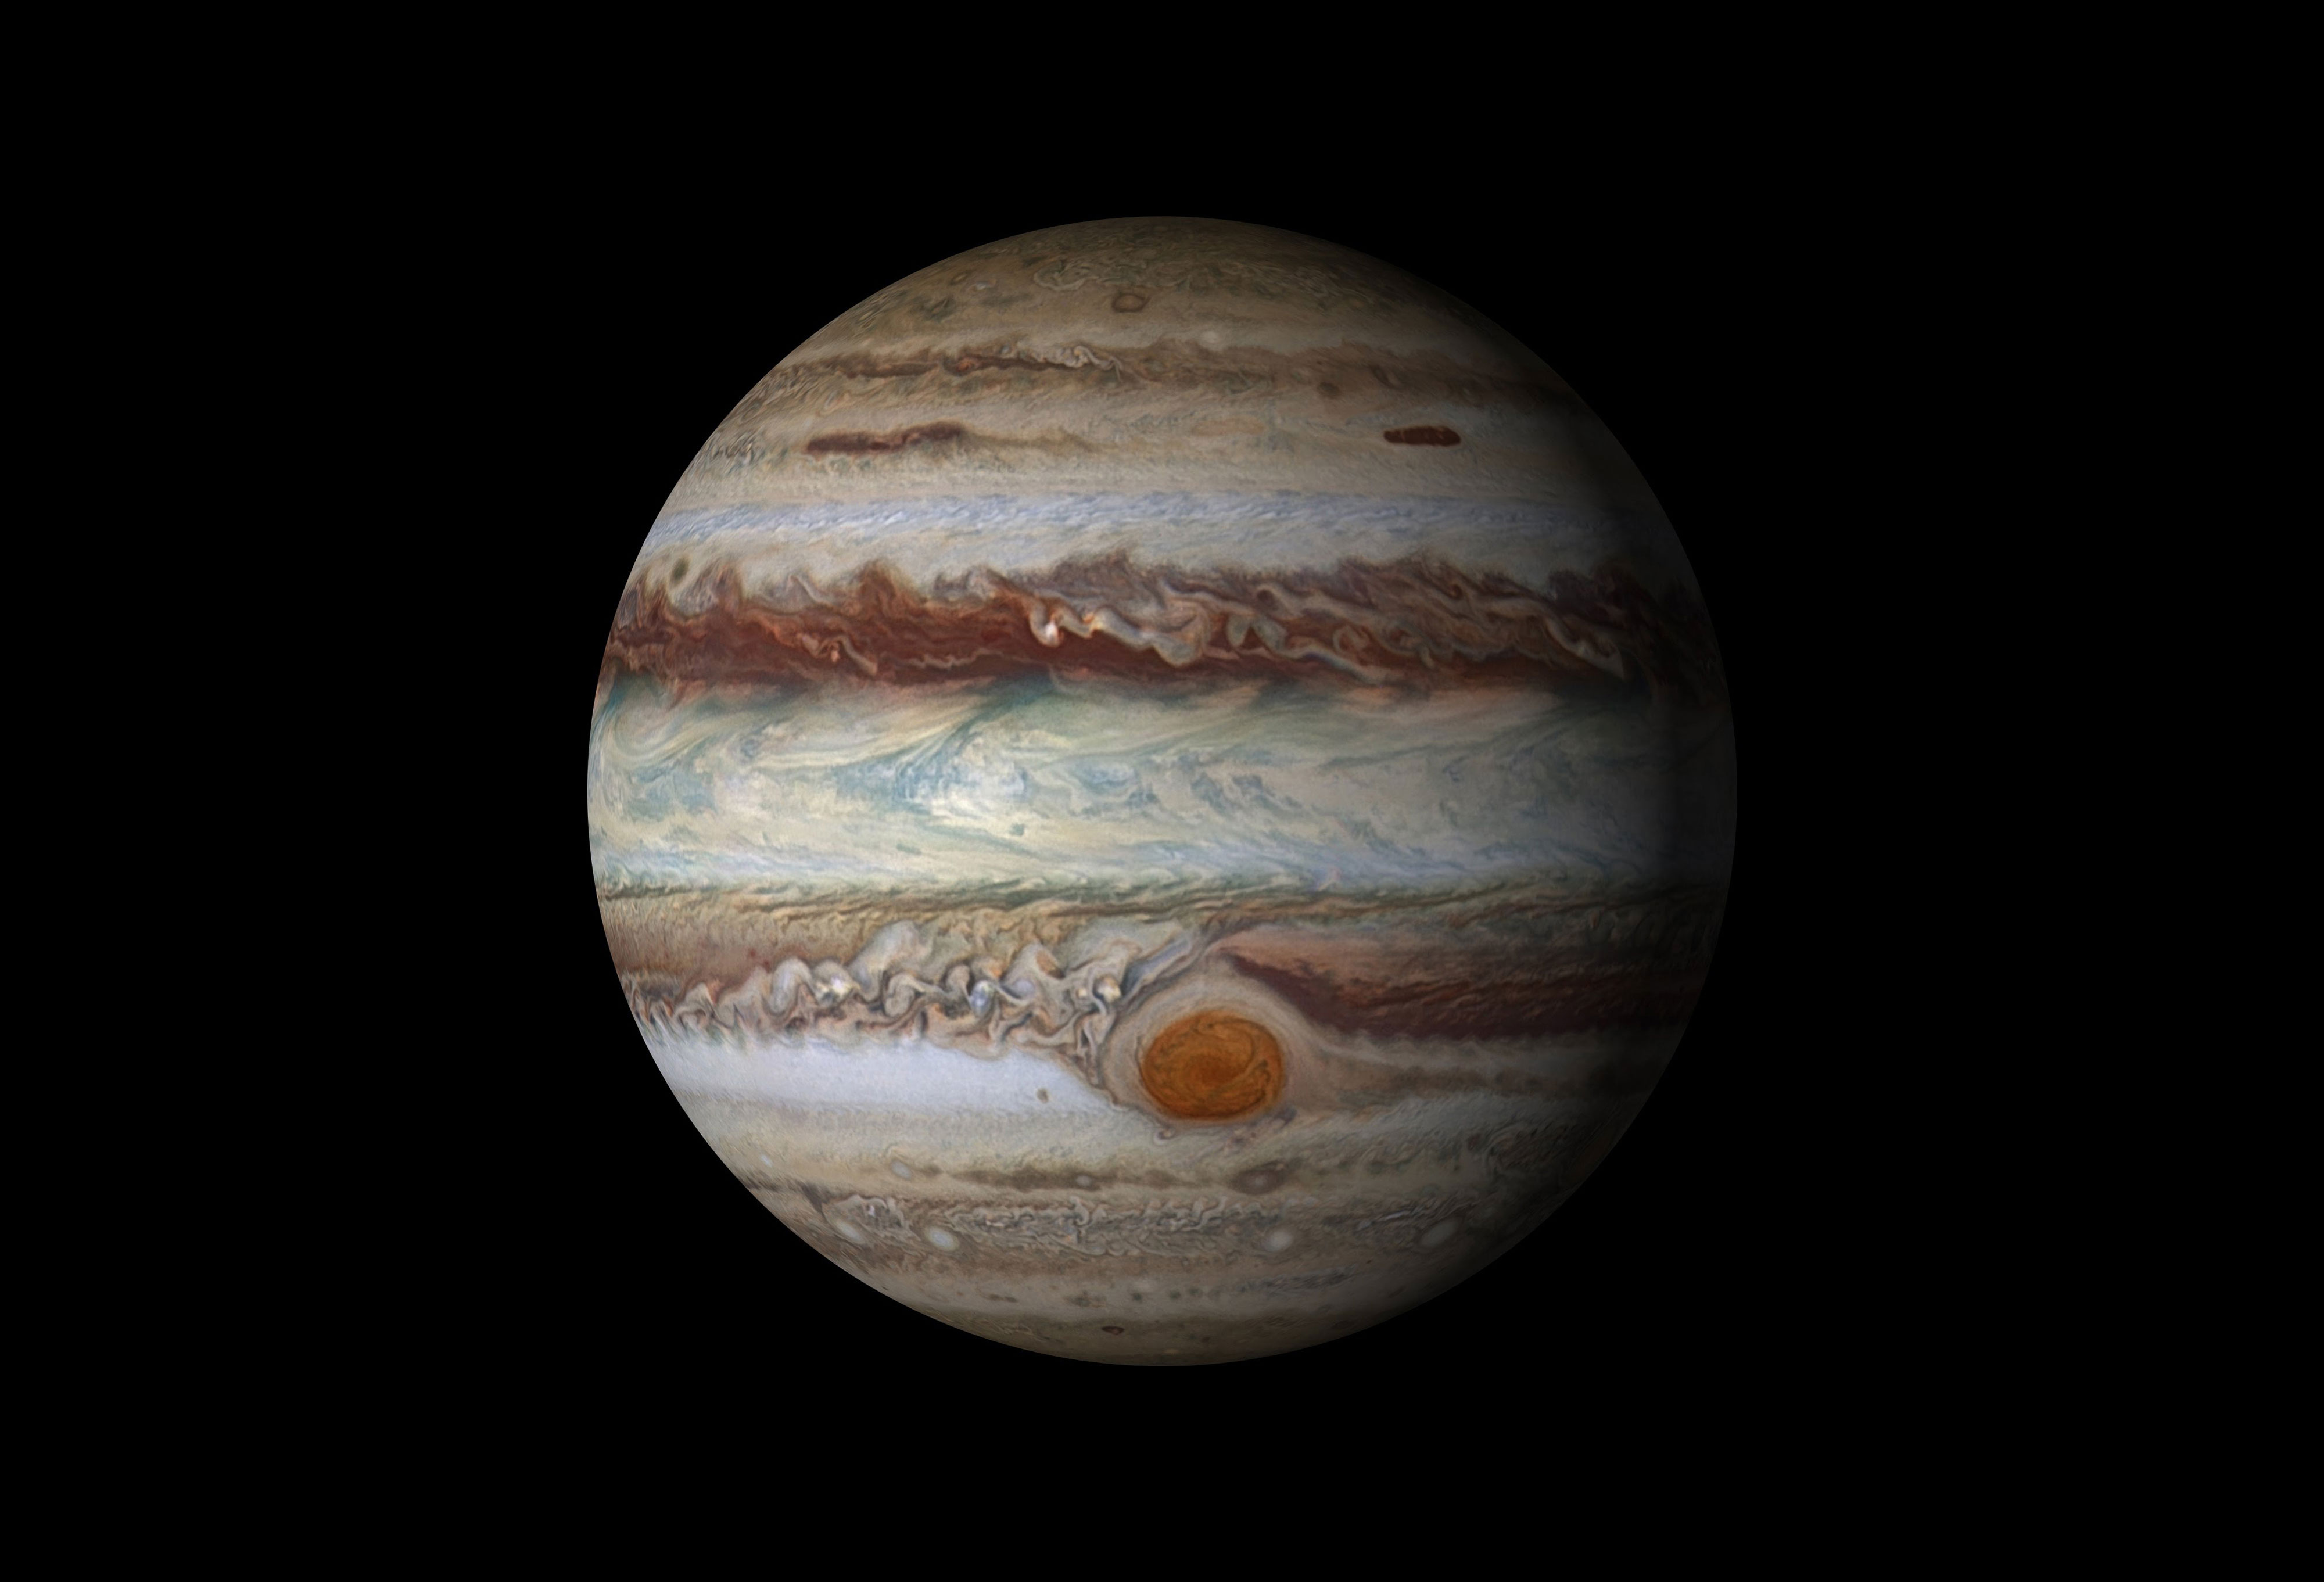 Ultra HD imagery from the Hubble Space Telescope revealed details never before seen on Jupiter. Credit: NASA